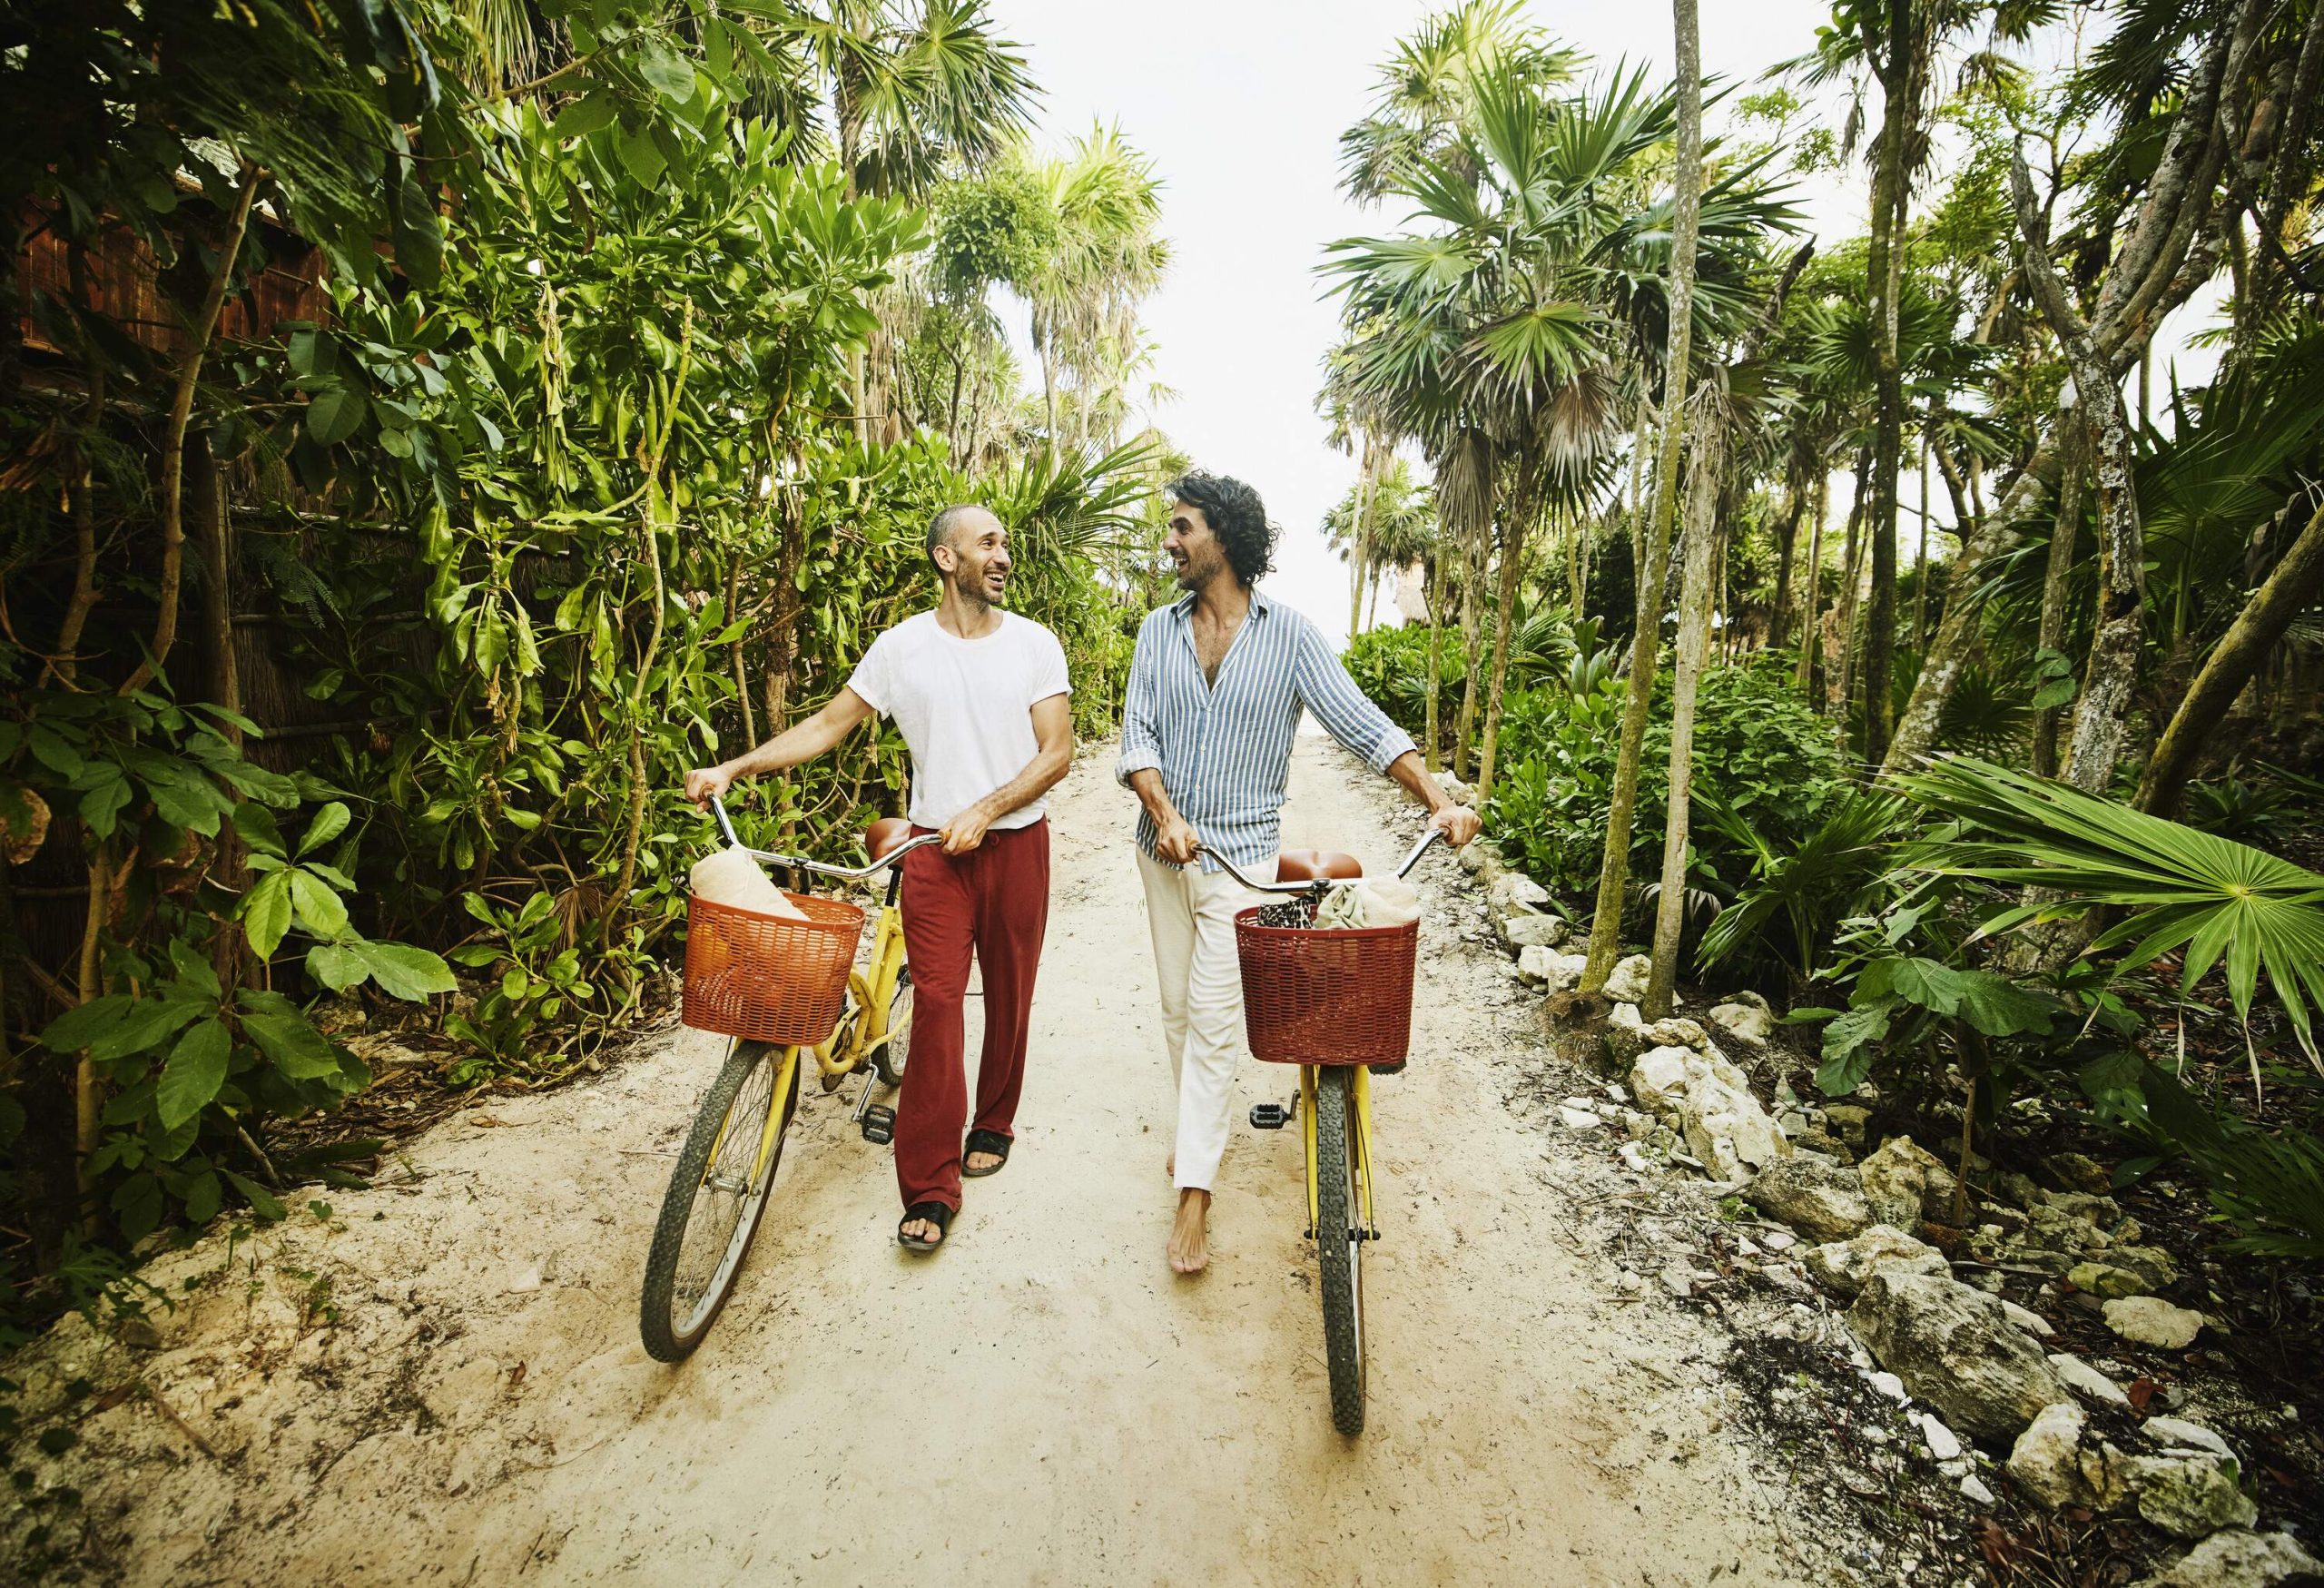 Lgbtq male couple walking on a tropical unpaved road with bicycles amongst trees